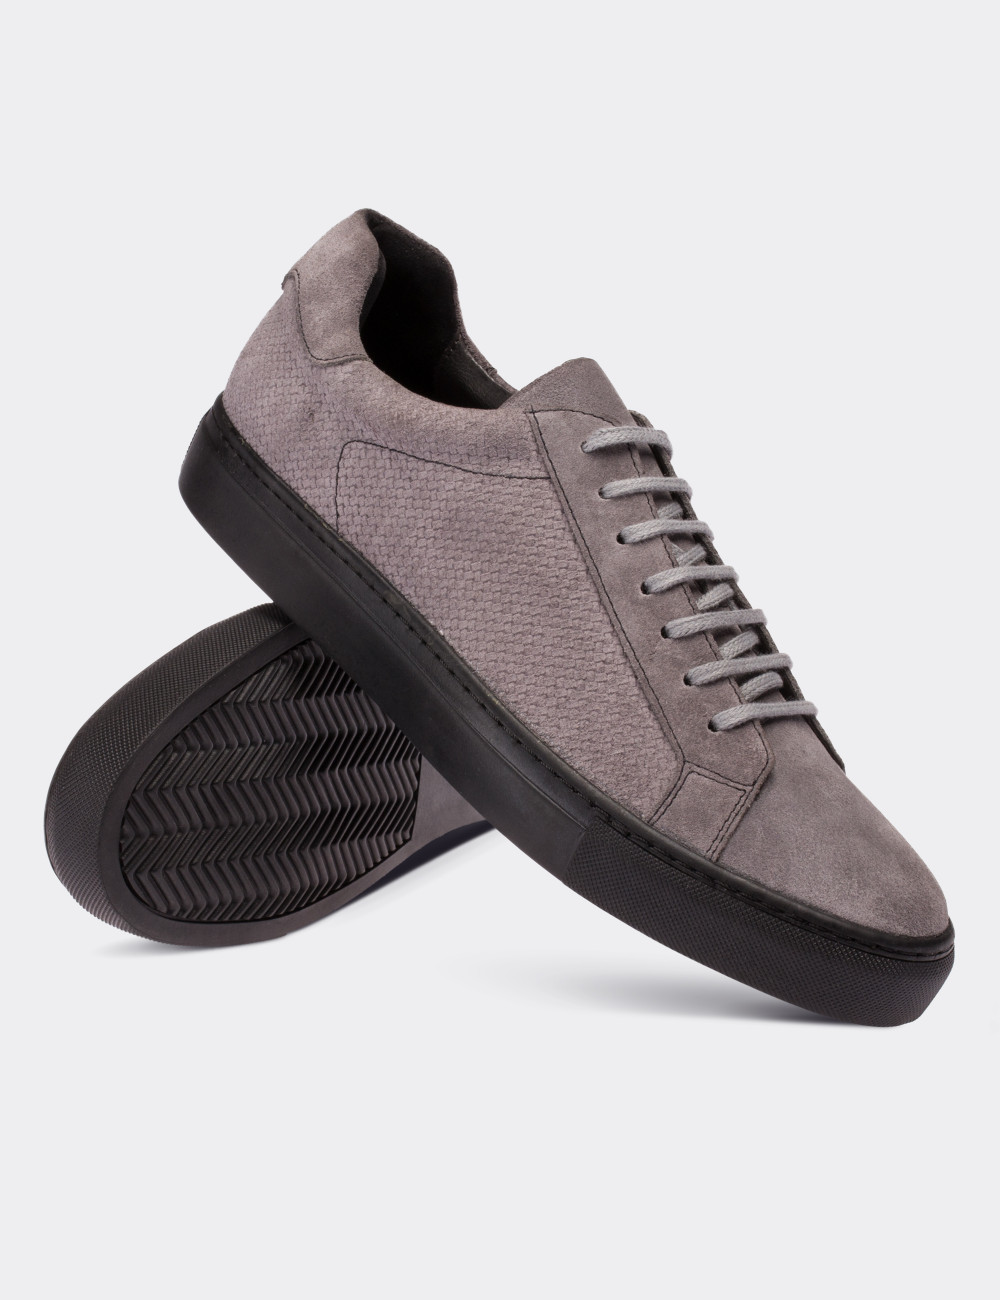 Gray Suede Leather Sneakers - 01681MGRIC02